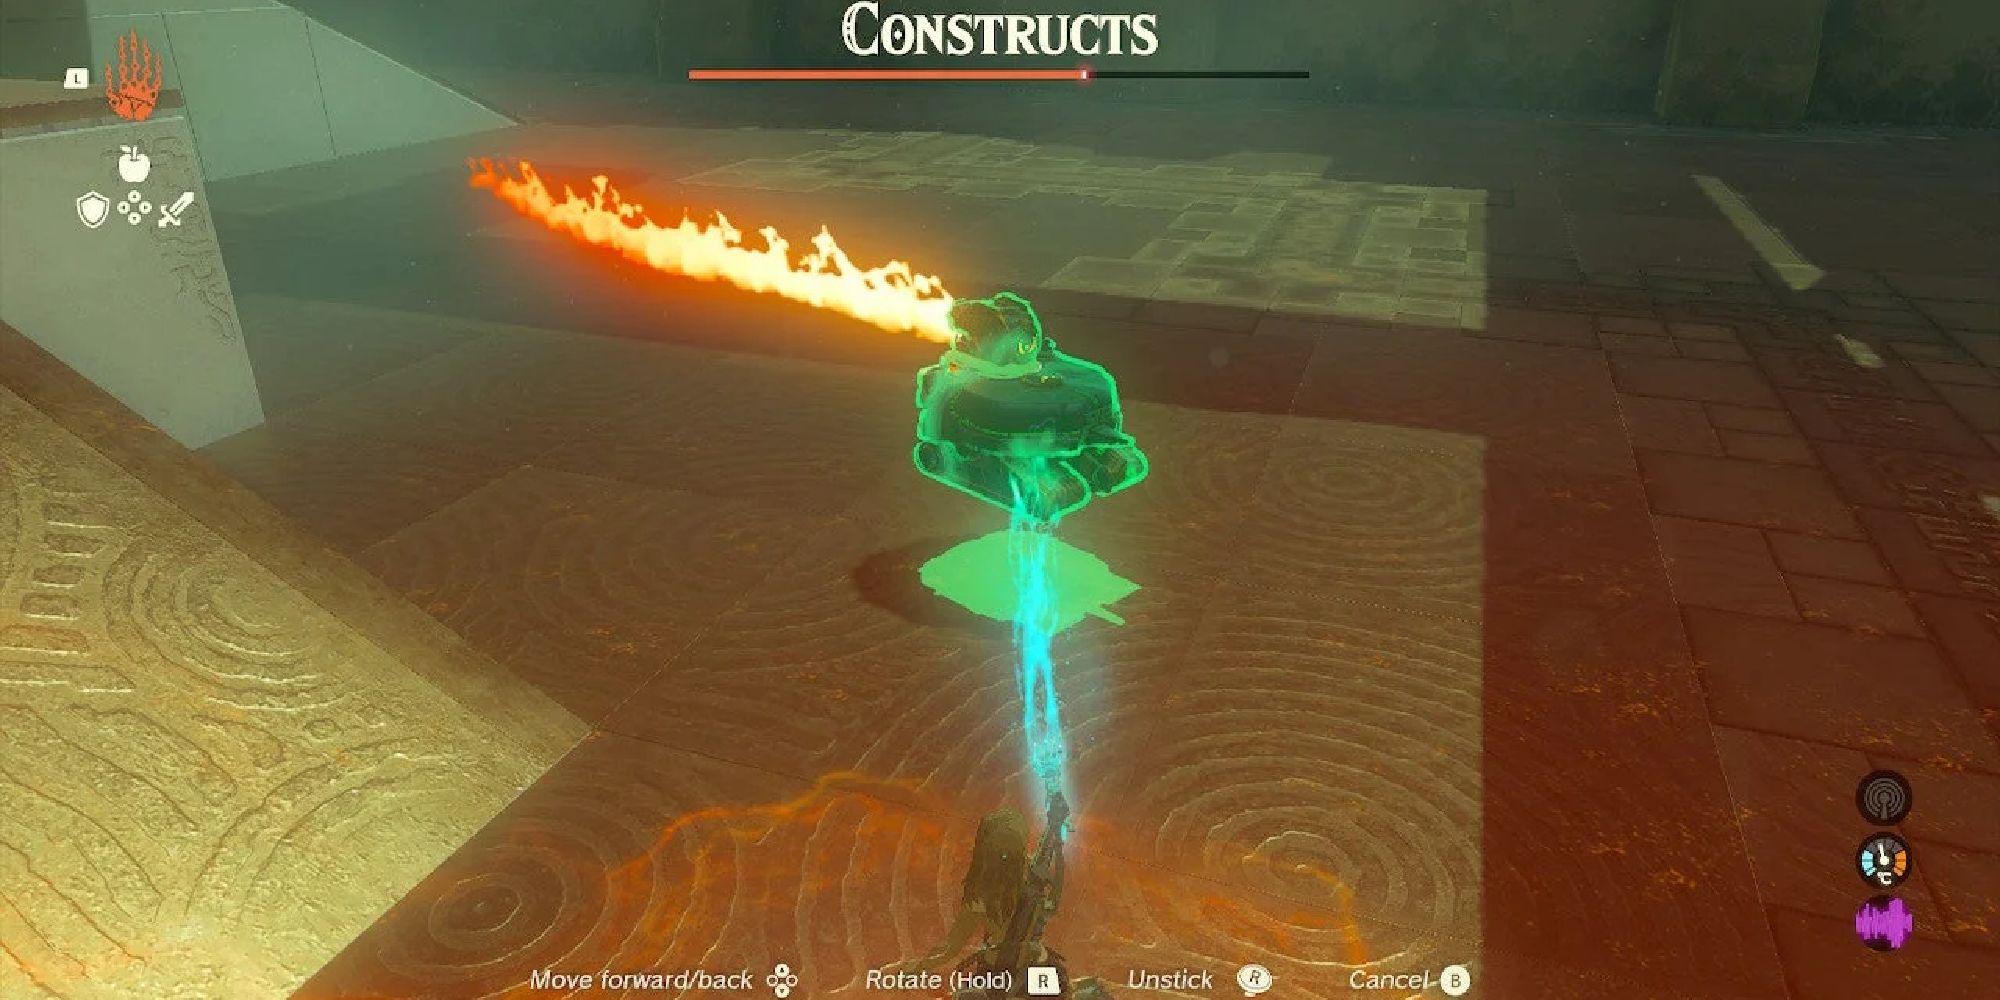 Link facing off against one of the Constructs guarding the Mayachideg shrine. 